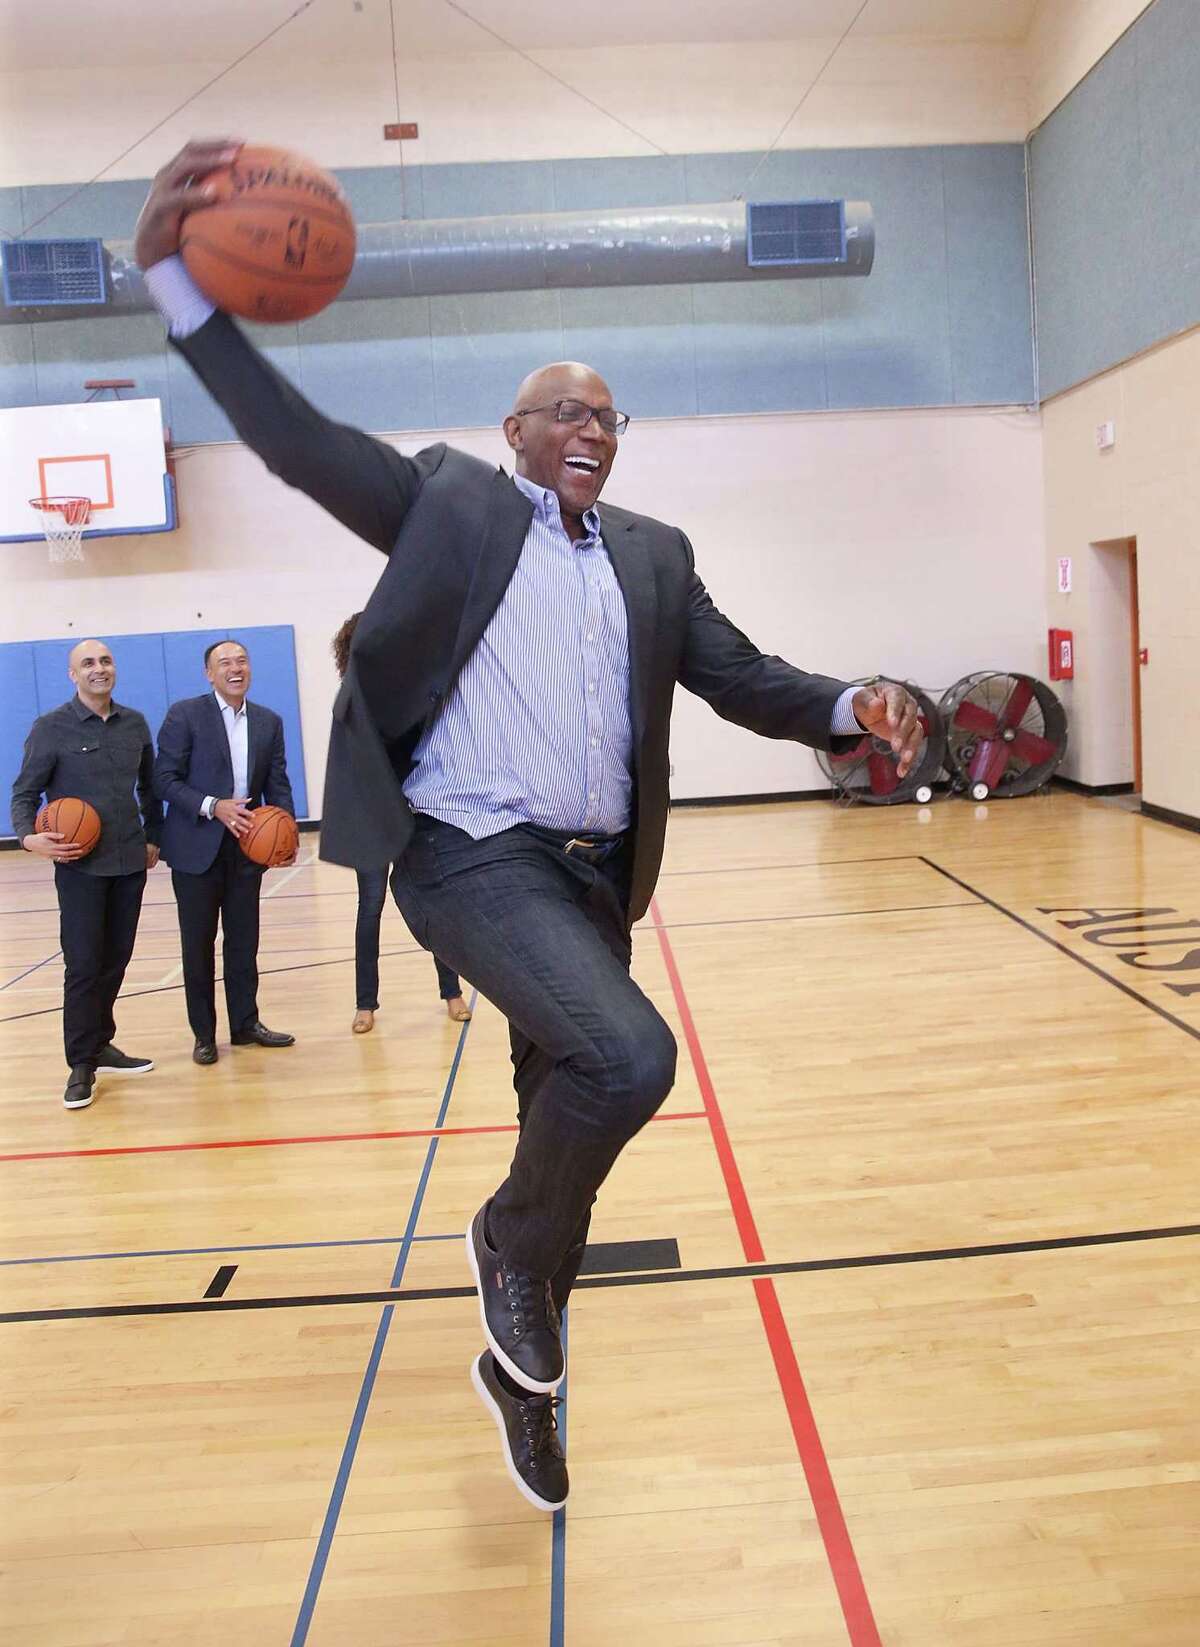 AUSTIN, TX - MARCH 09: NBA hall of famer, Clyde Drexler during a Facebook Live session at SXSW held at Austin Recreation Center on March 9, 2018 in Austin, Texas.